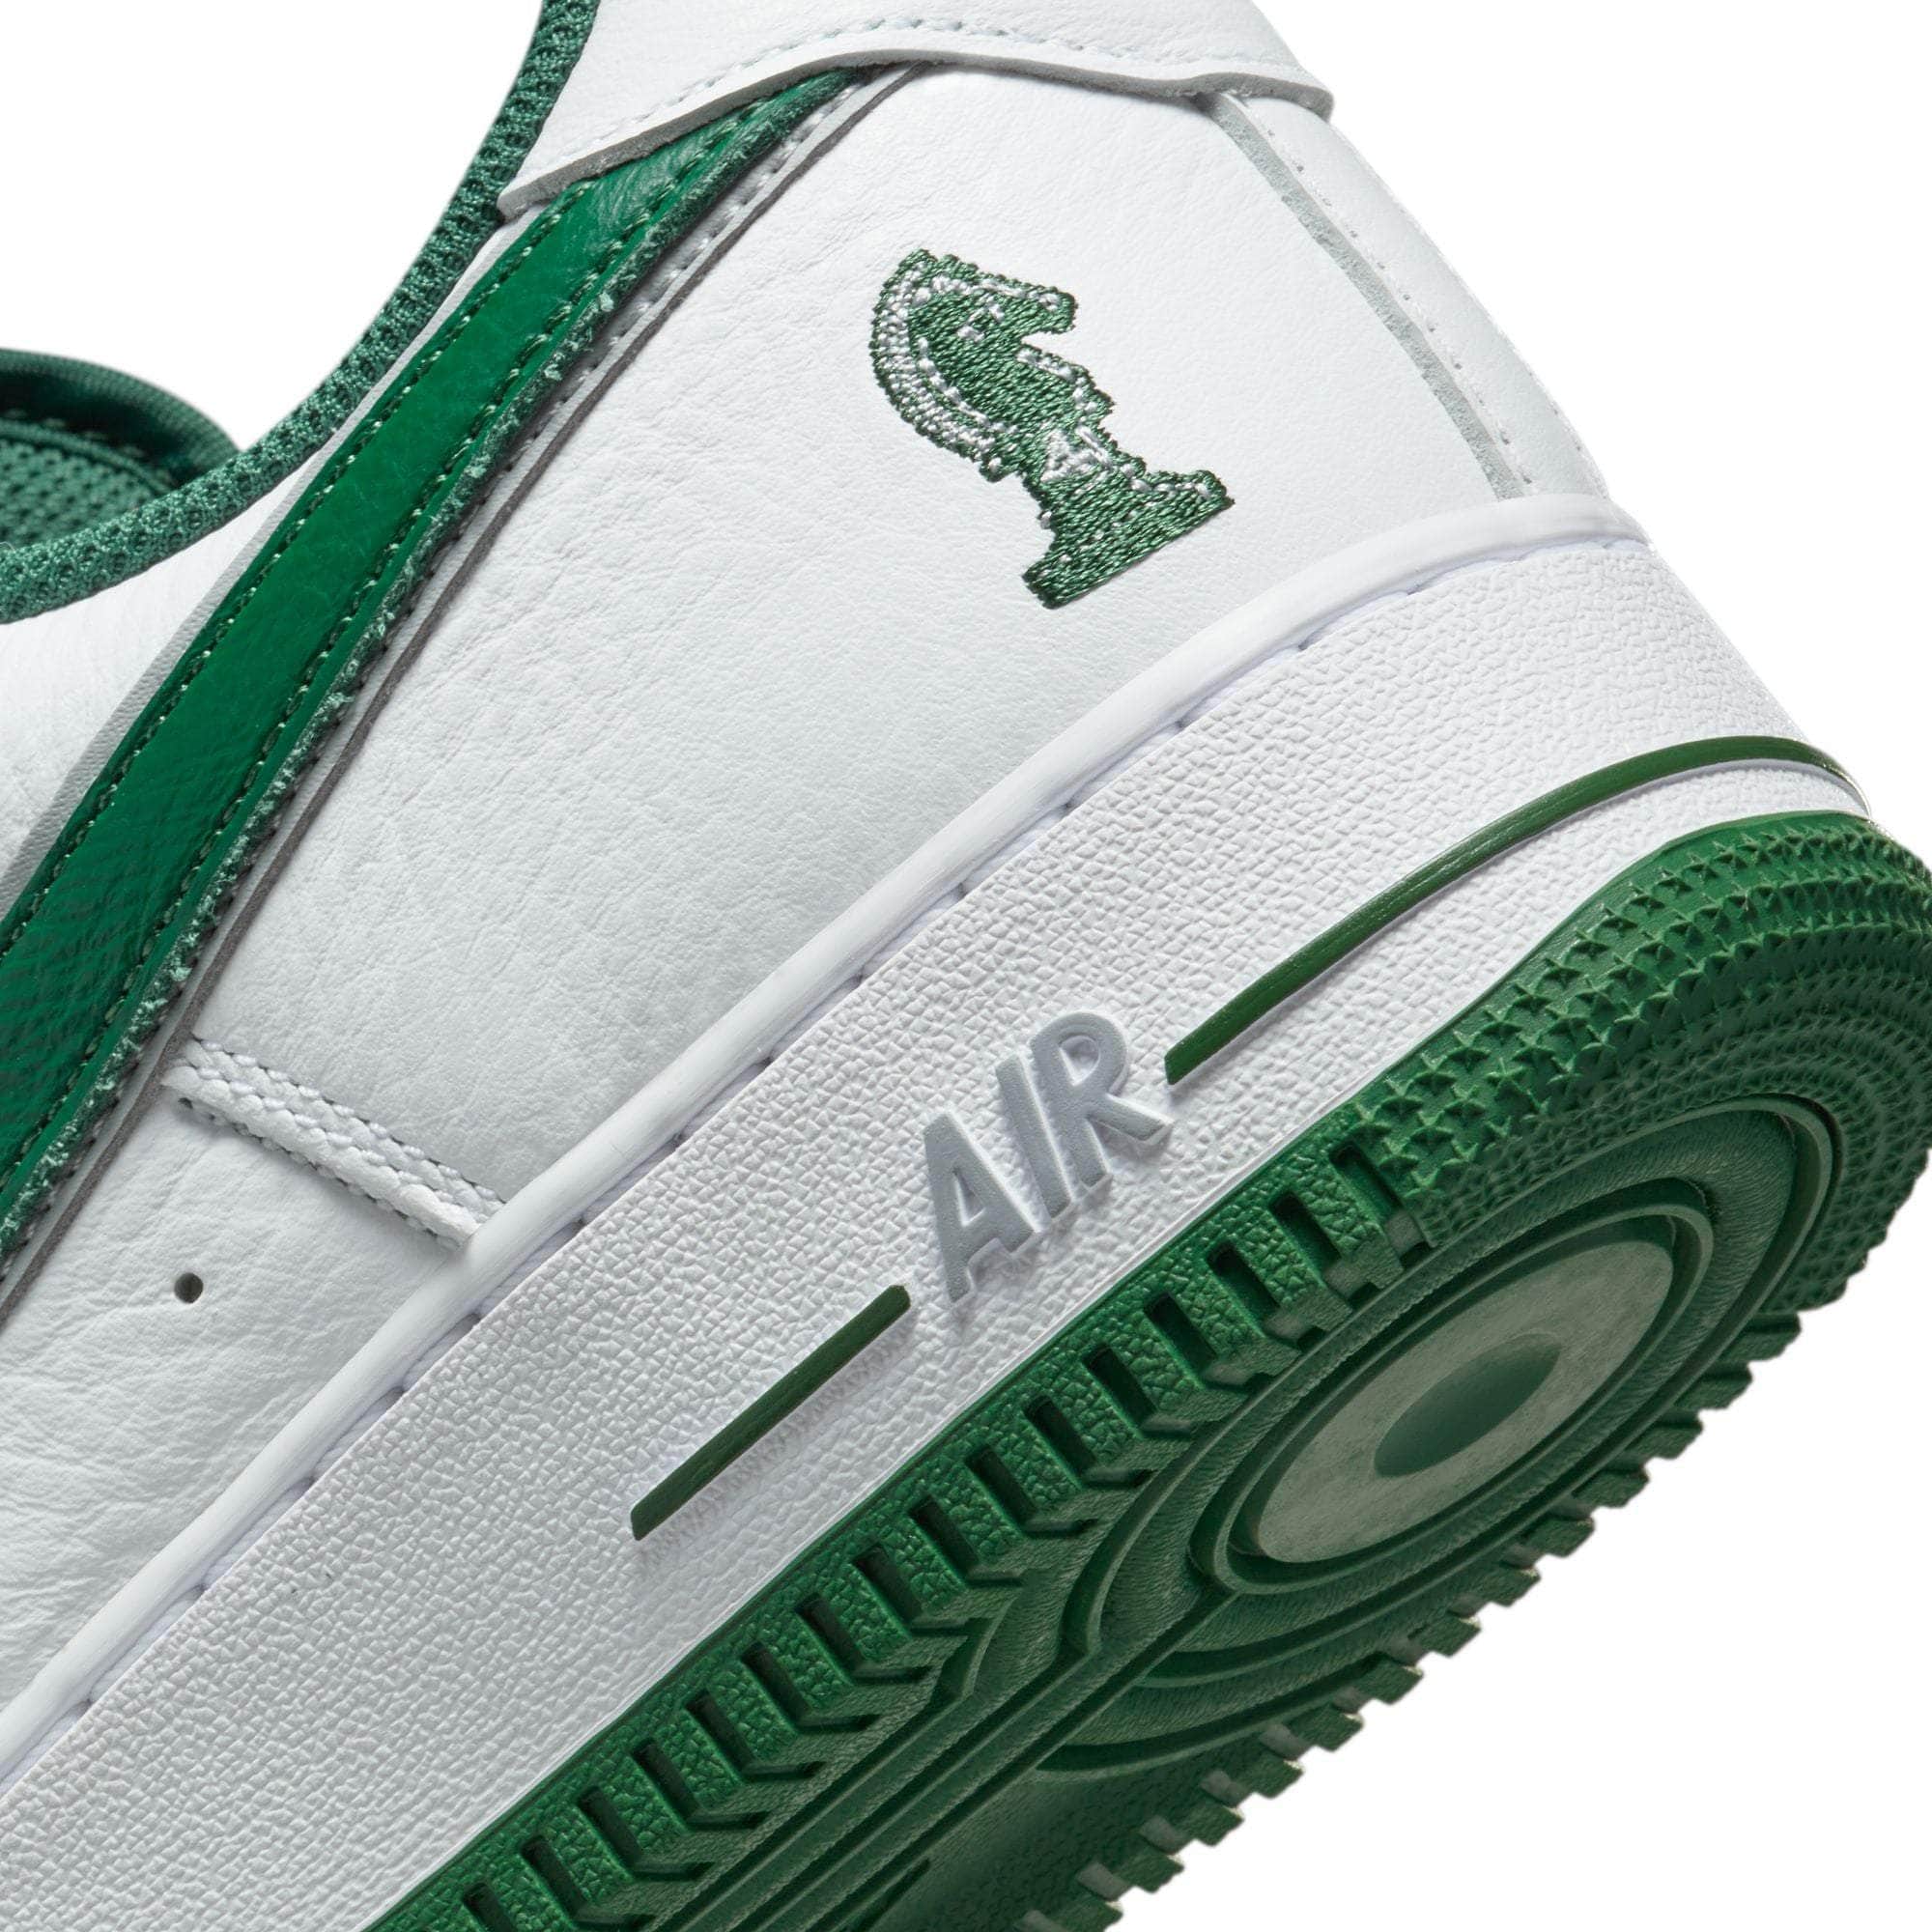 Where to Buy LeBron's Nike Air Force 1 Low 'Four Horsemen